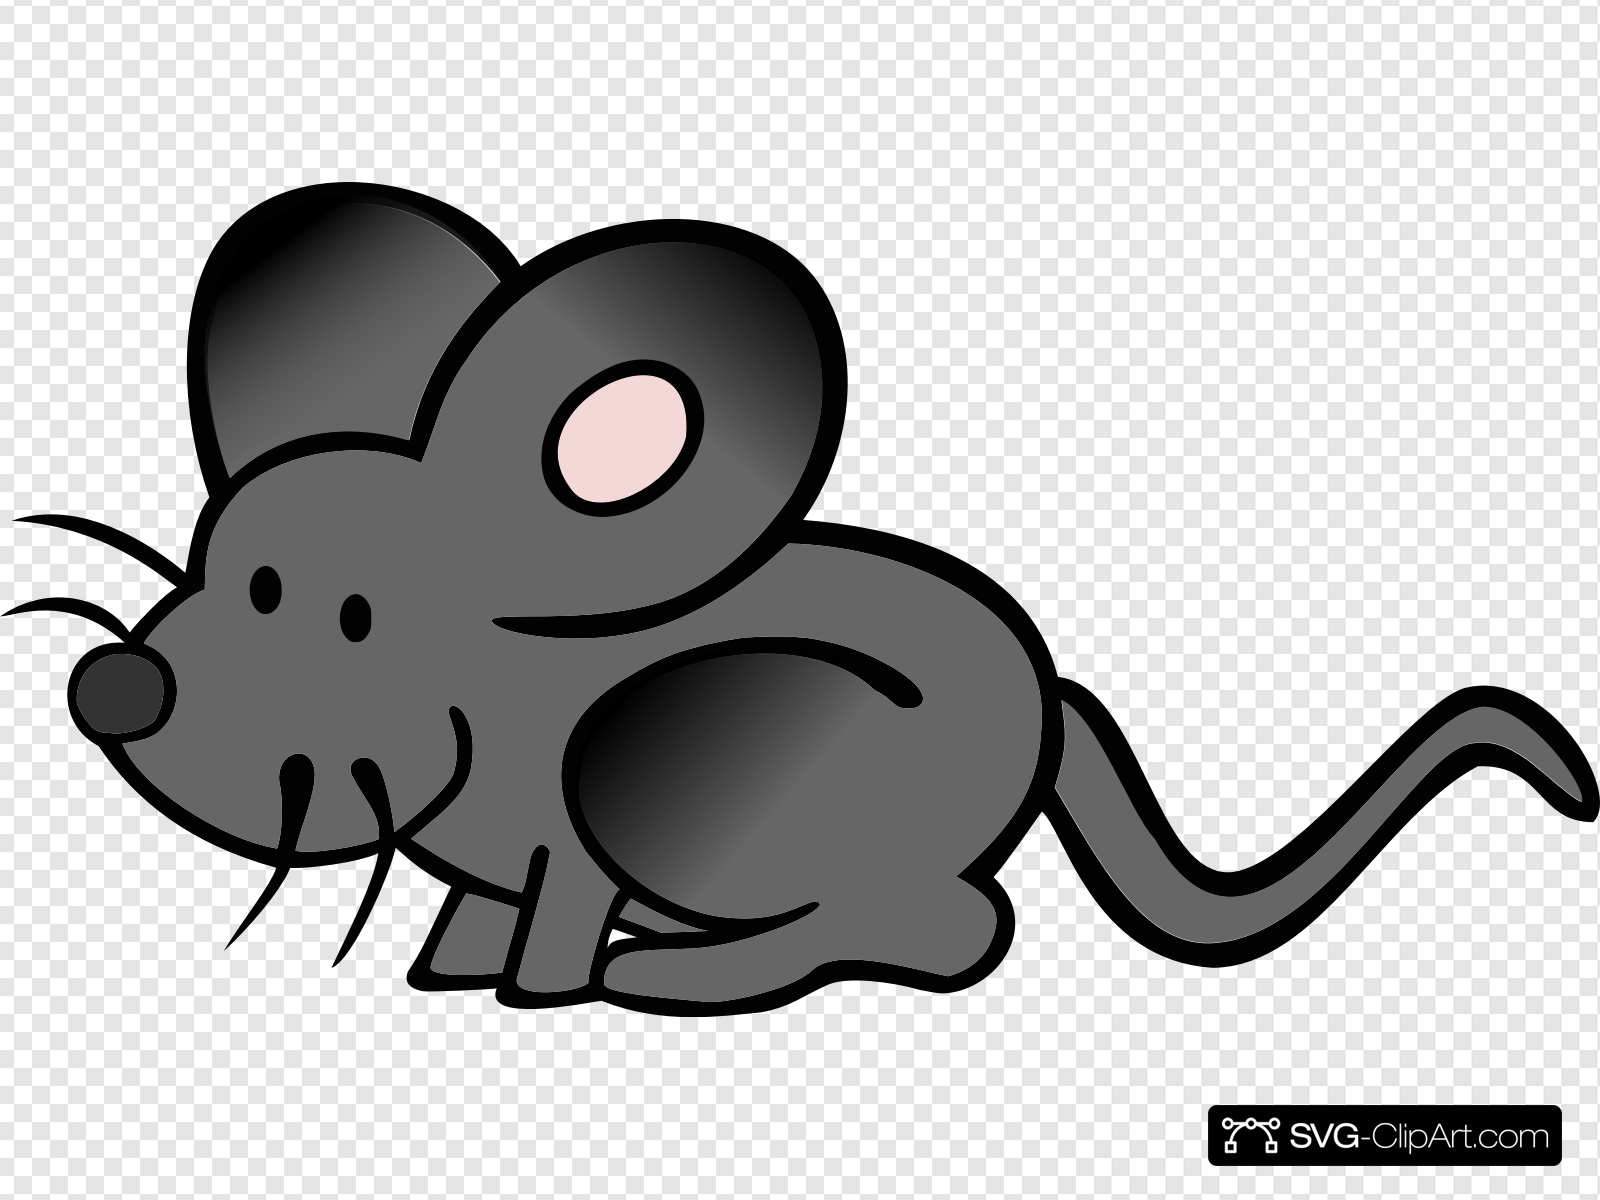 Catroon Mouse Clip art, Icon and SVG